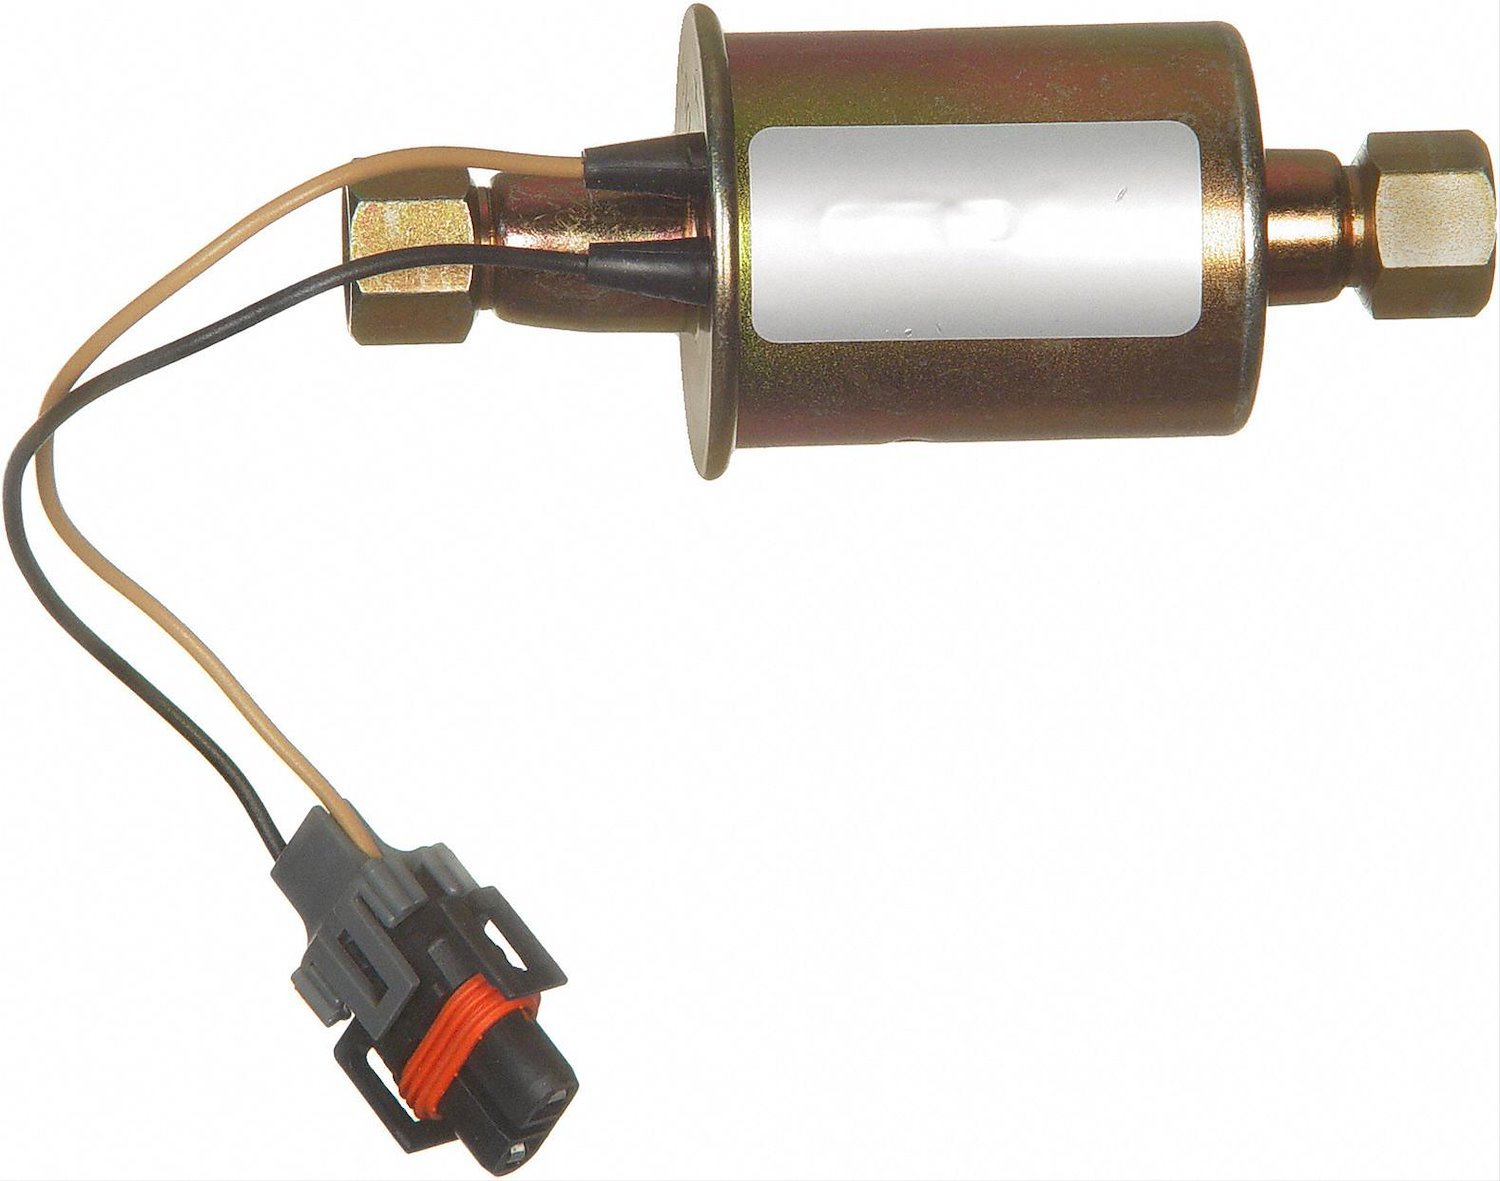 Replacement In-Line Electric Fuel Pump for 2001-2015 Chevy Silverado 3500/GMC Sierra 3500